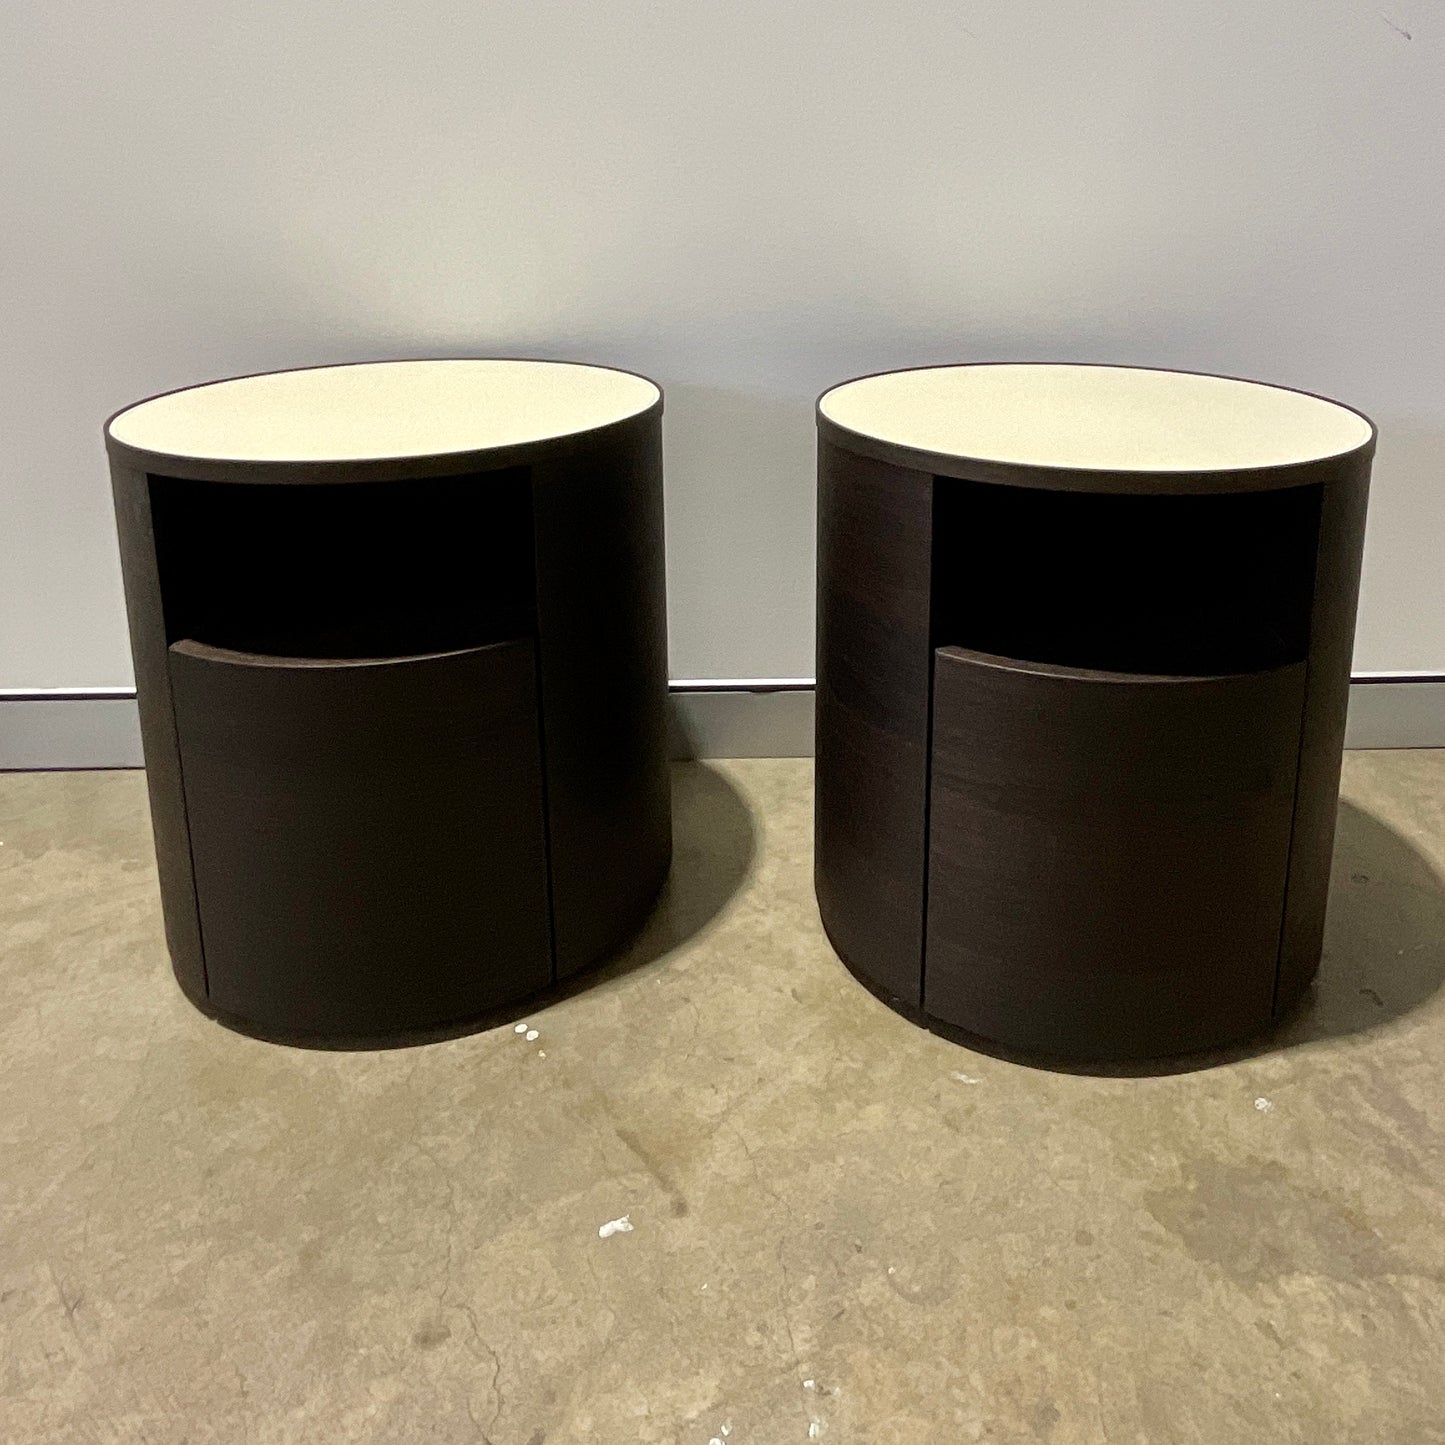 PAIR Onda Bedside Tables by Paolo Piva for Poliform